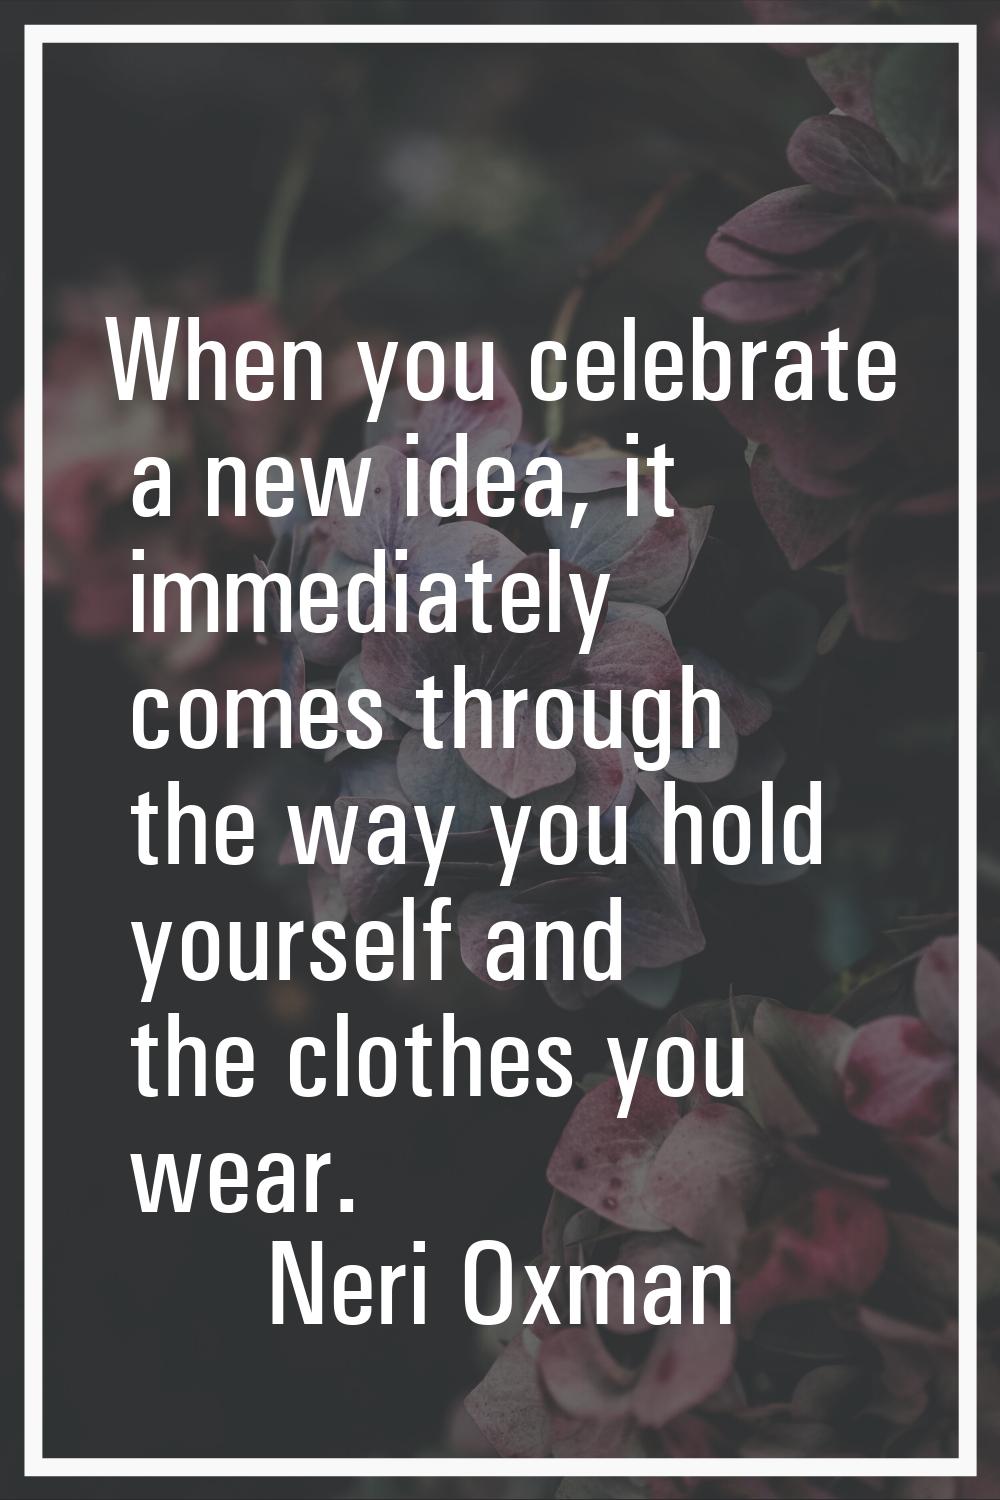 When you celebrate a new idea, it immediately comes through the way you hold yourself and the cloth